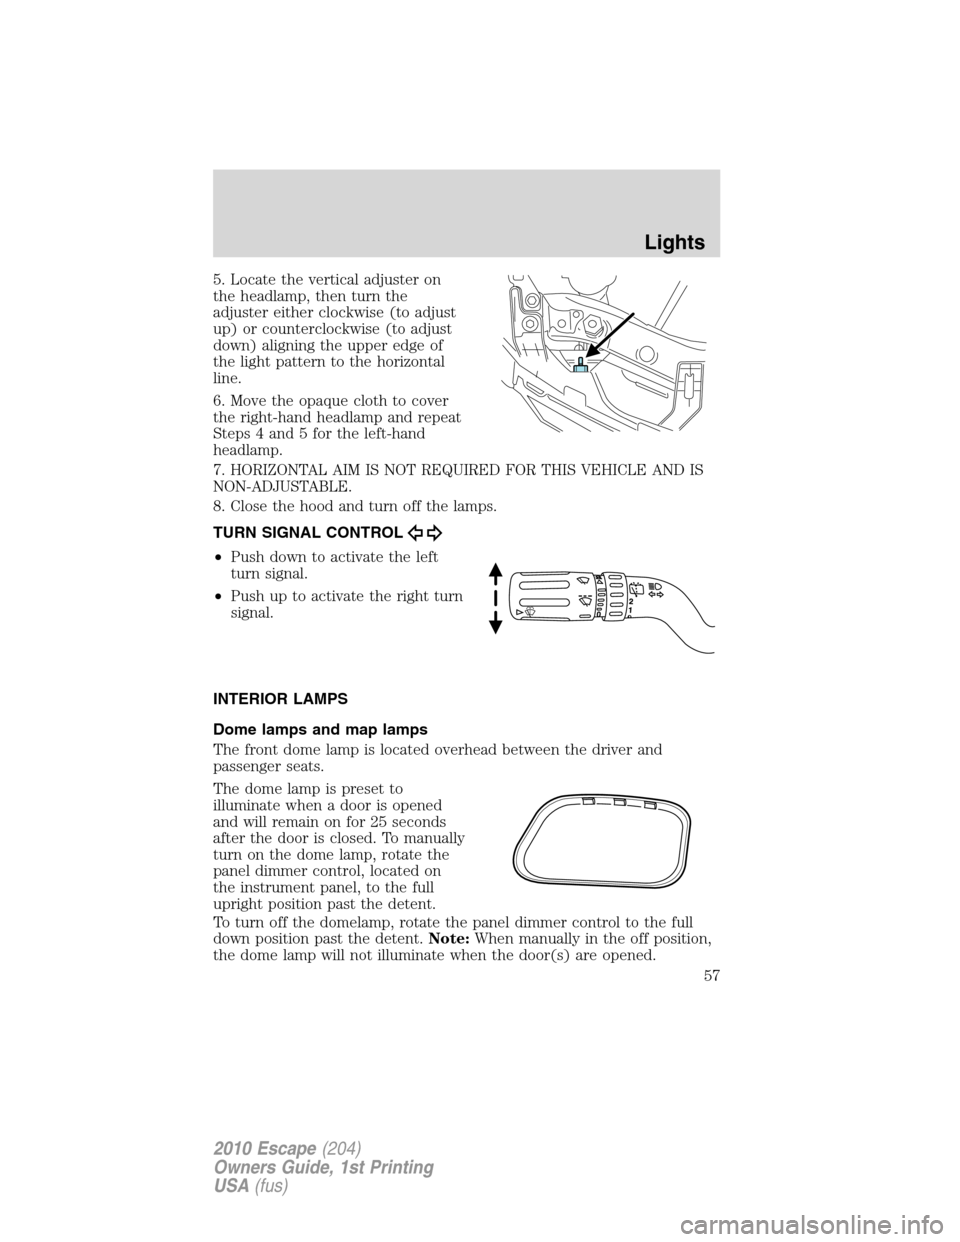 FORD ESCAPE 2010 2.G Owners Manual 5. Locate the vertical adjuster on
the headlamp, then turn the
adjuster either clockwise (to adjust
up) or counterclockwise (to adjust
down) aligning the upper edge of
the light pattern to the horizon